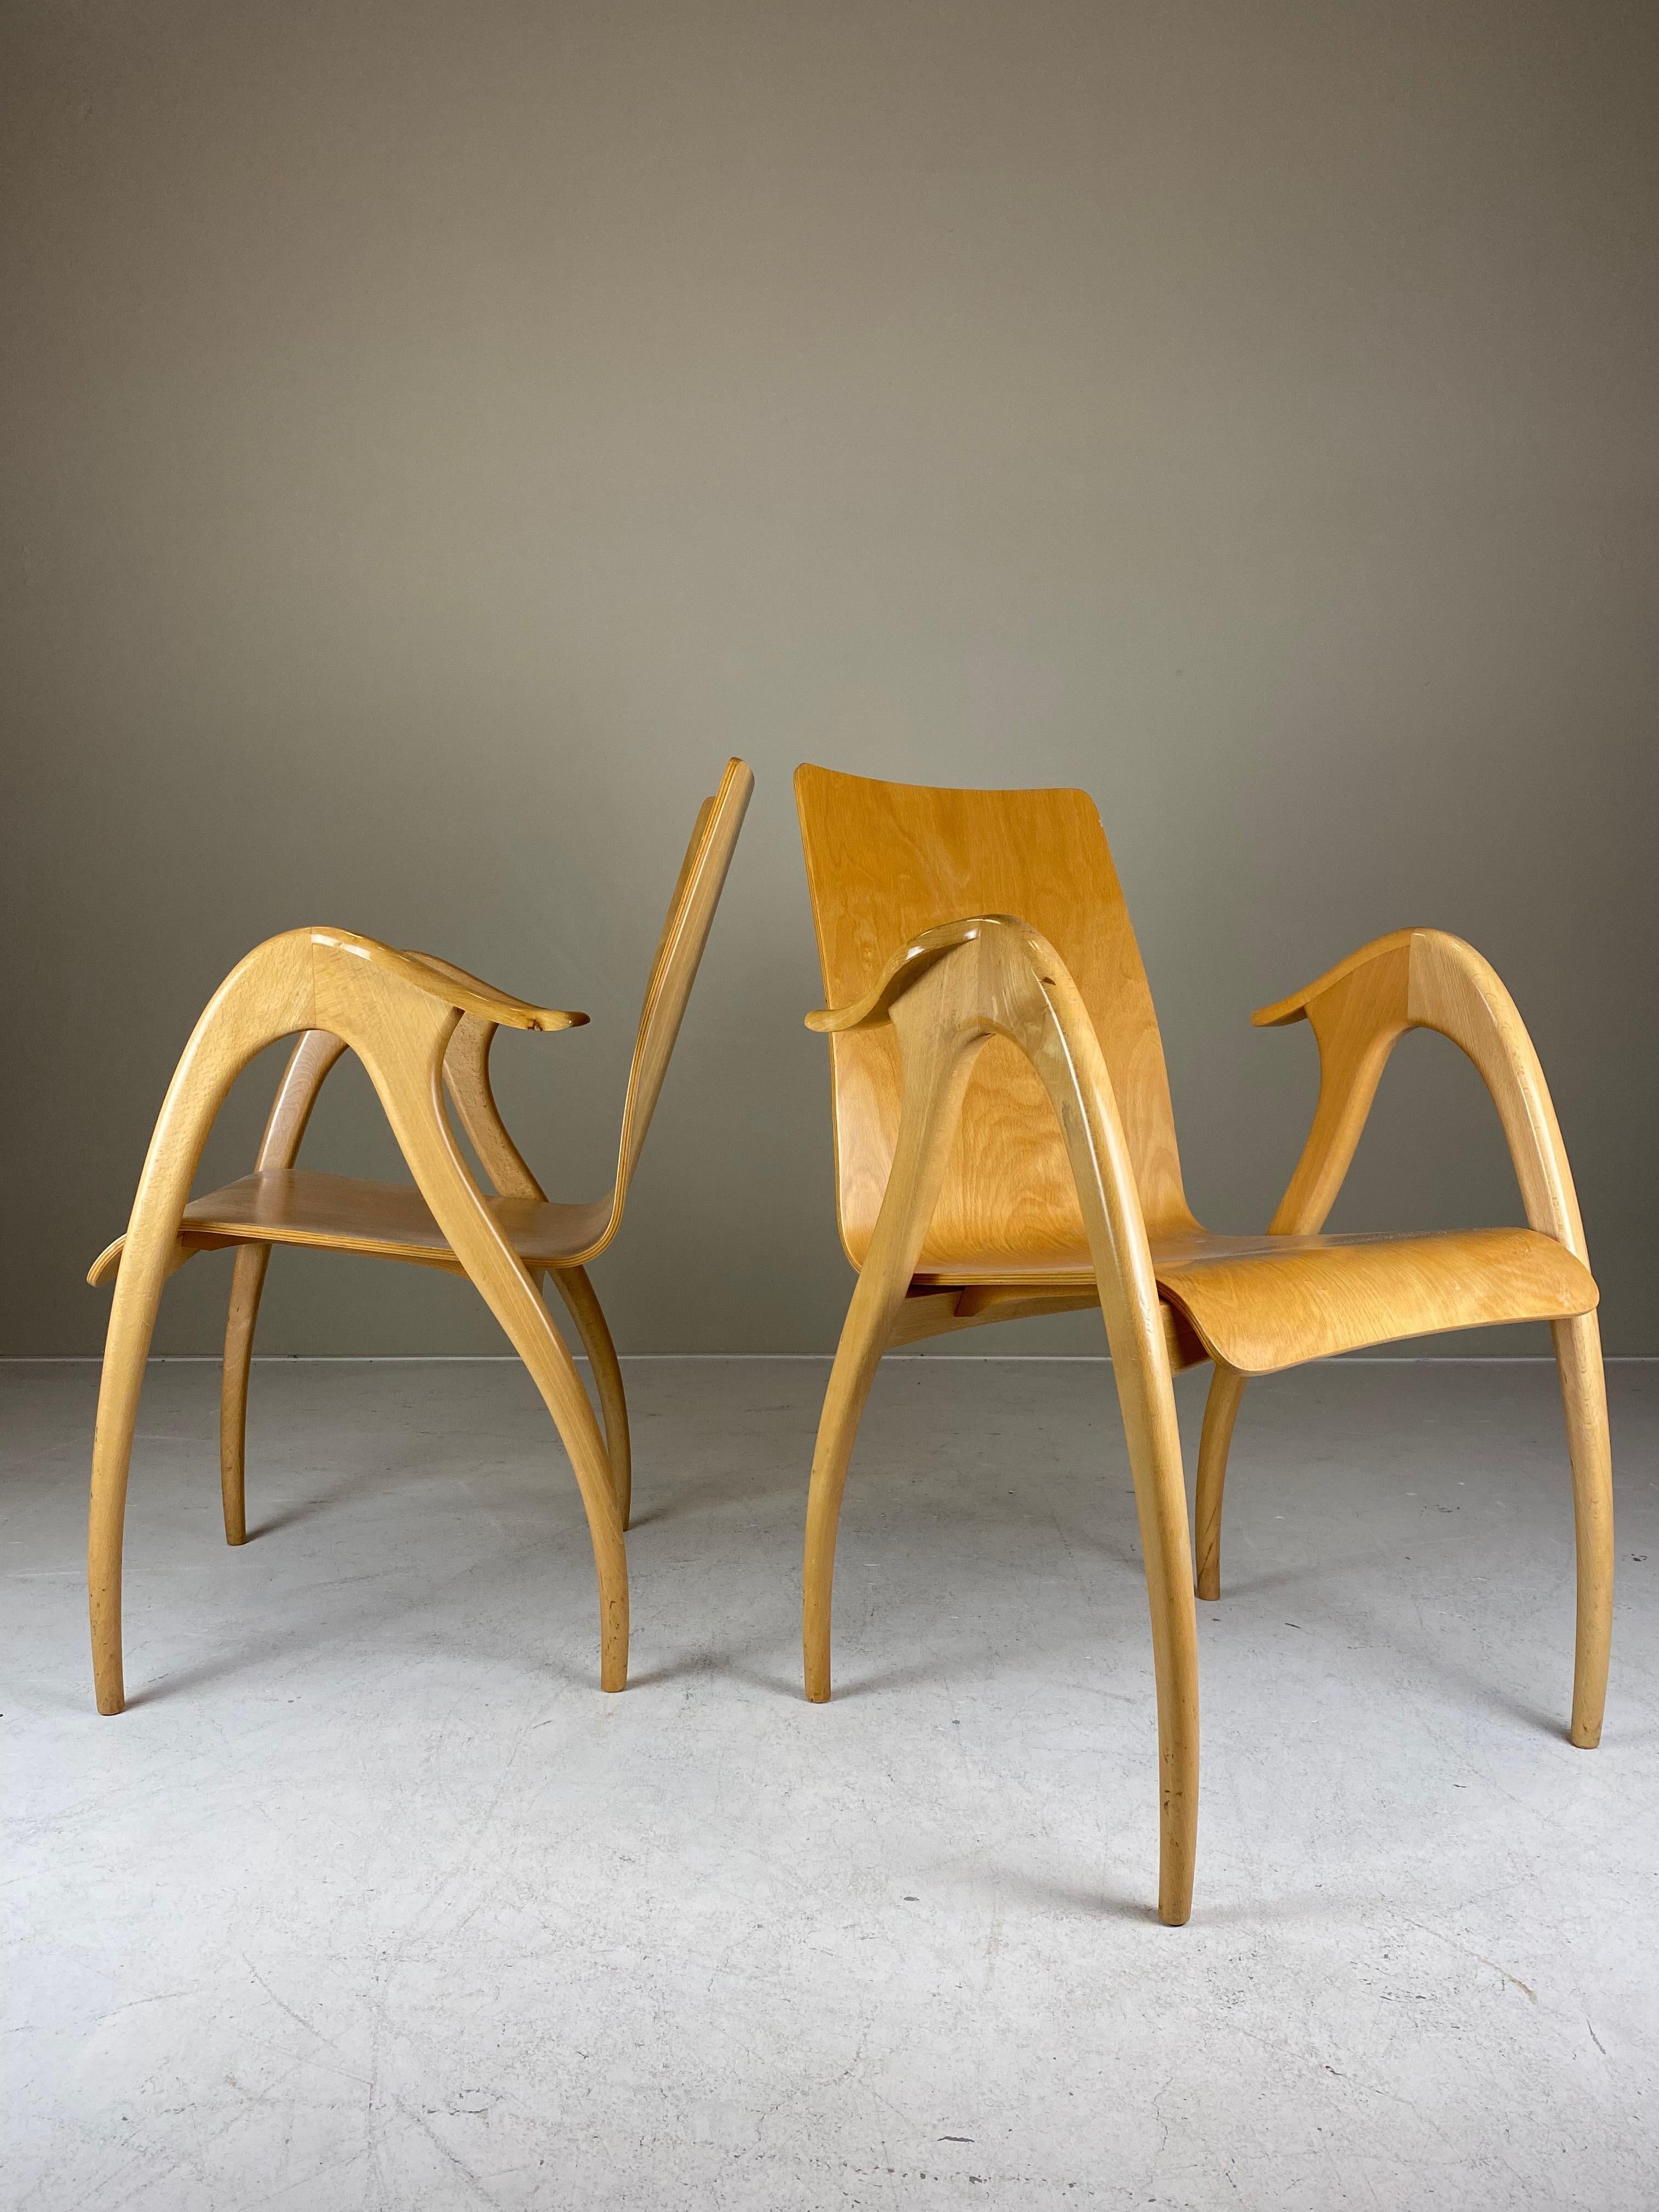 Mid-20th Century Set of 4 Sculptural Plywood Armchairs by Malatesta and Mason, 1950s, Mid-Century For Sale